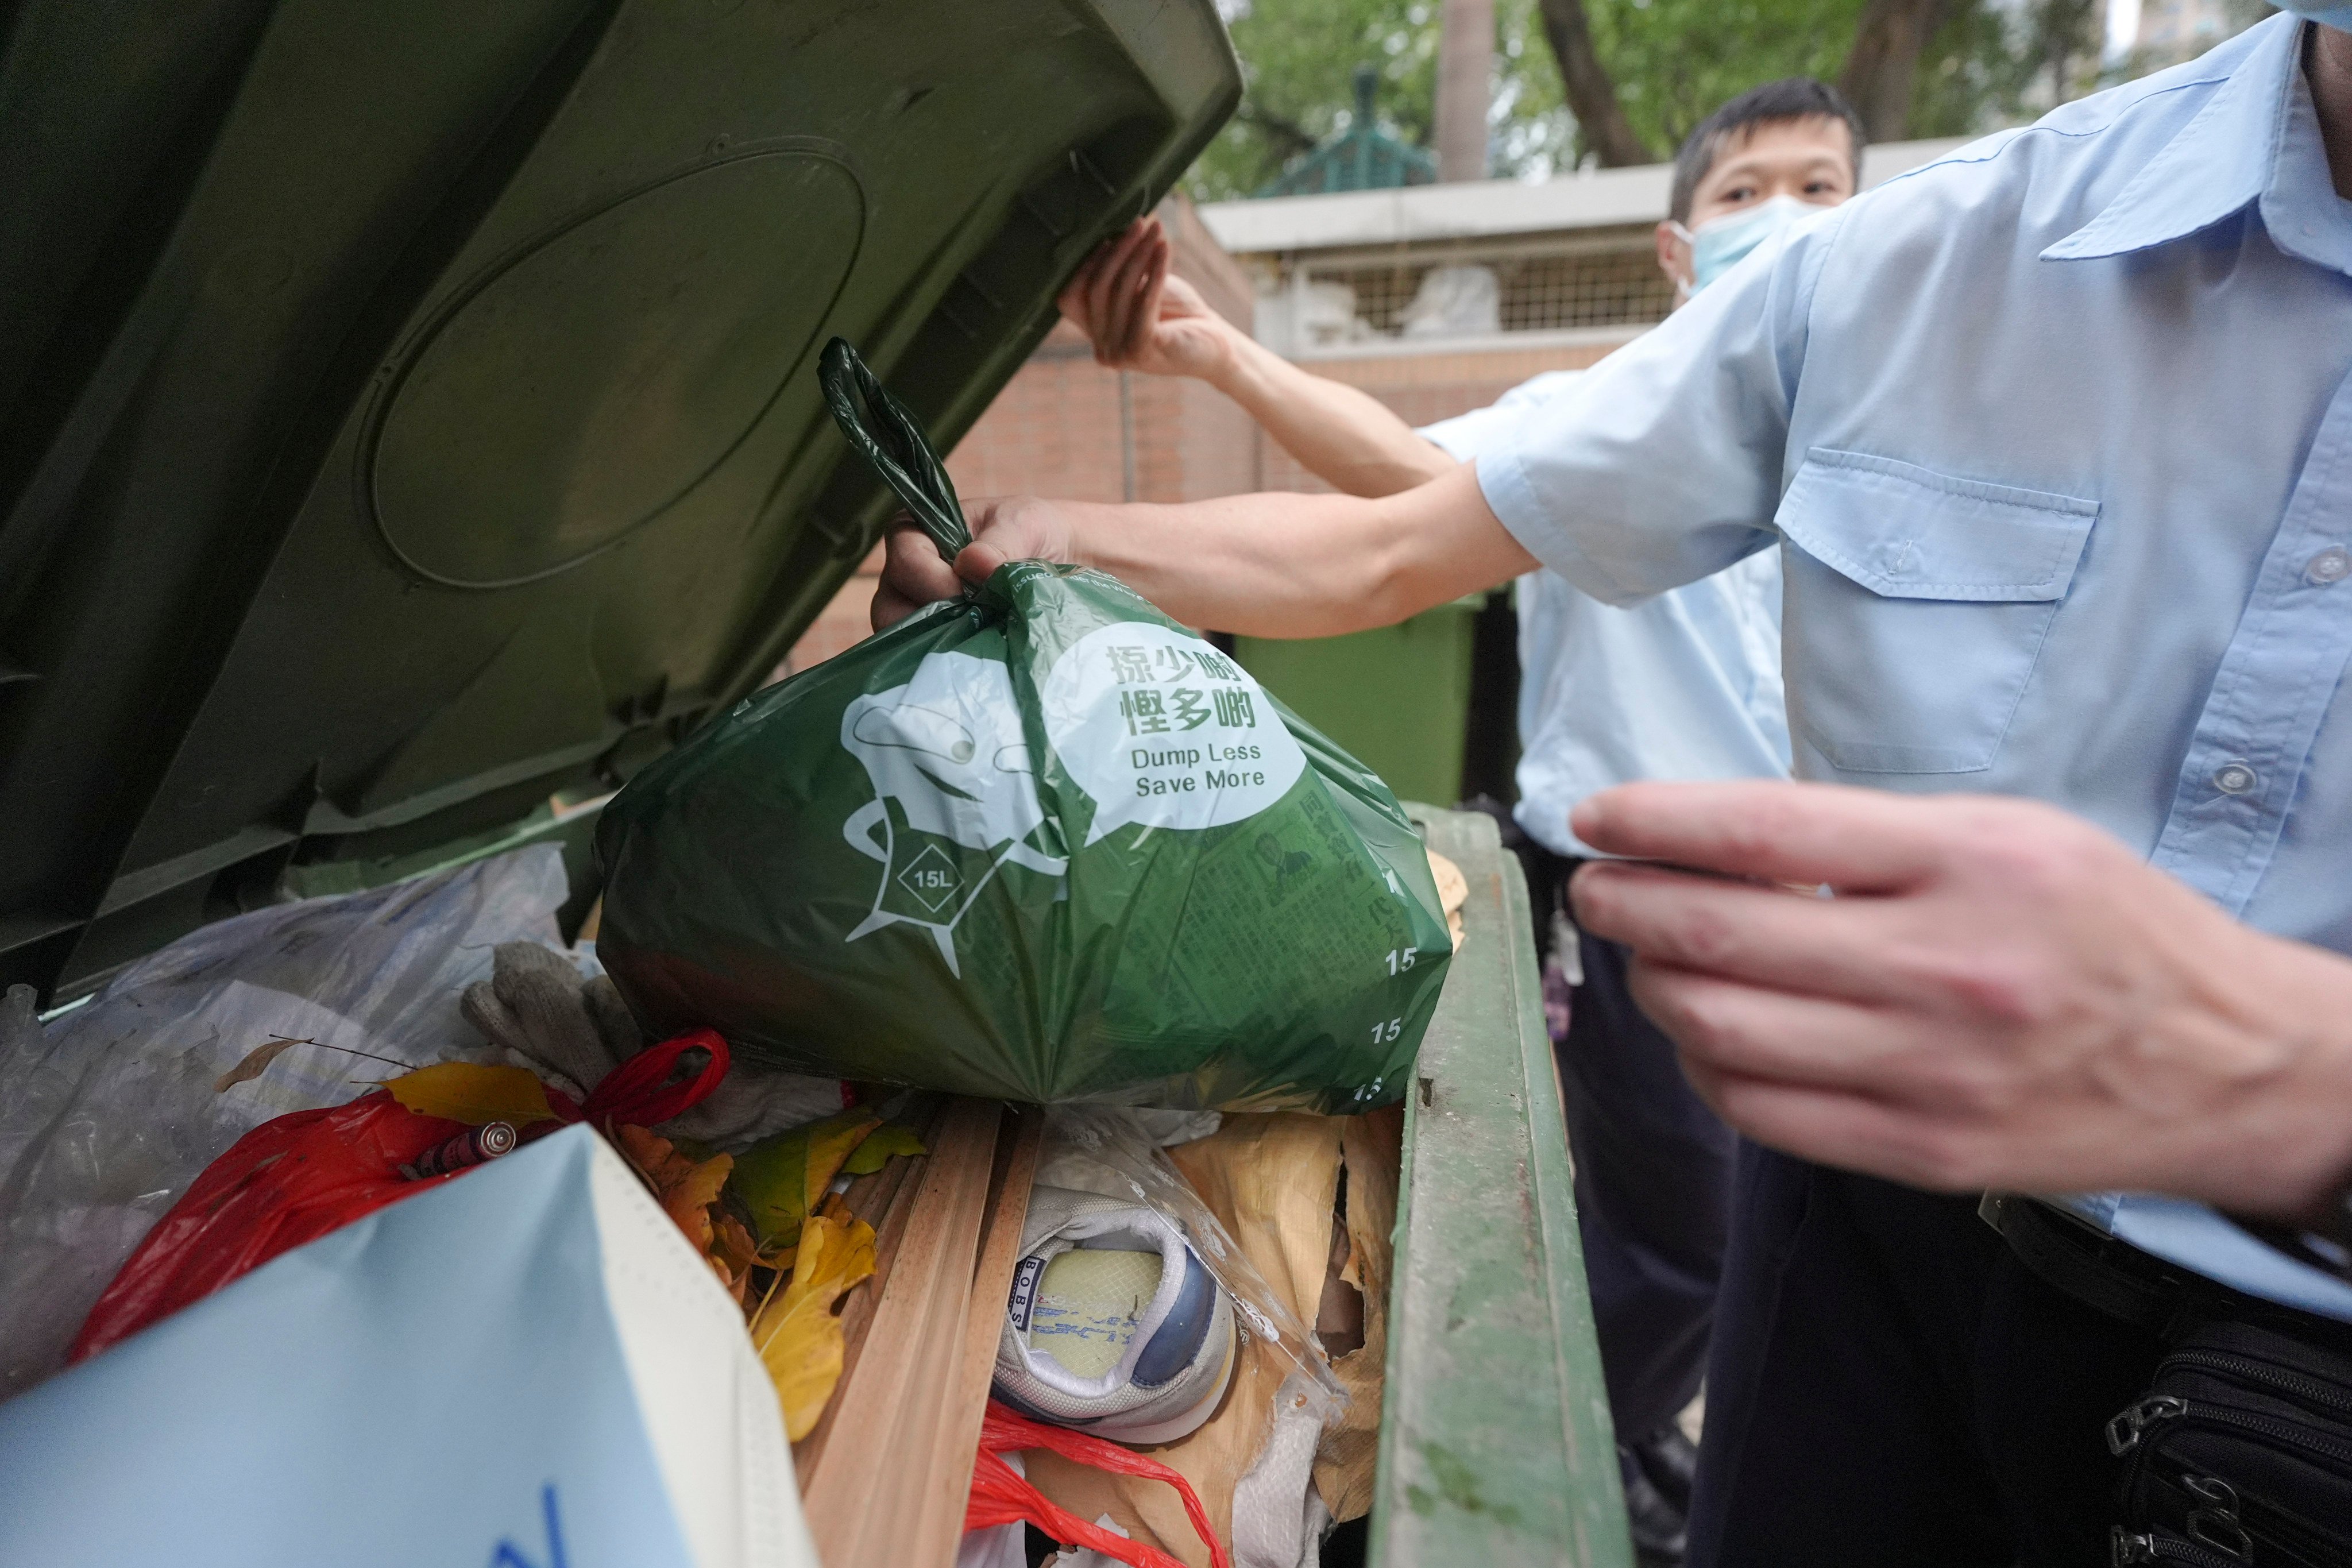 Designated garbage bags must be used when Hong Kong’s waste charging scheme starts in August. Photo: Eugene Lee